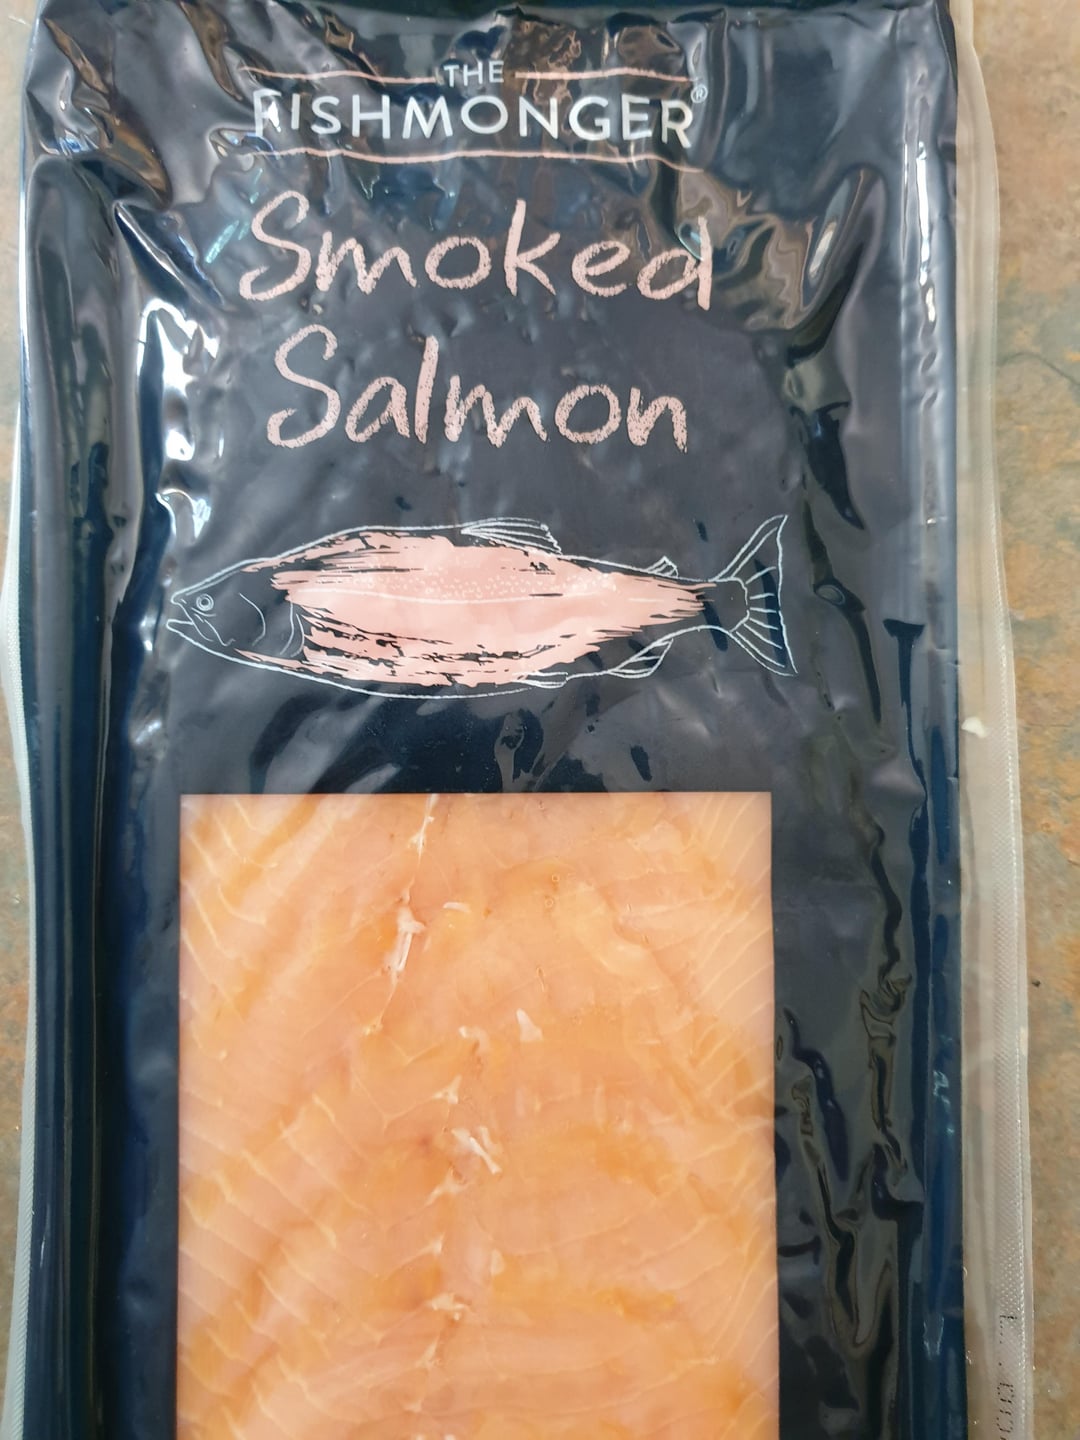 How Long Does Salmon Last: Keeping Your Salmon Fresh